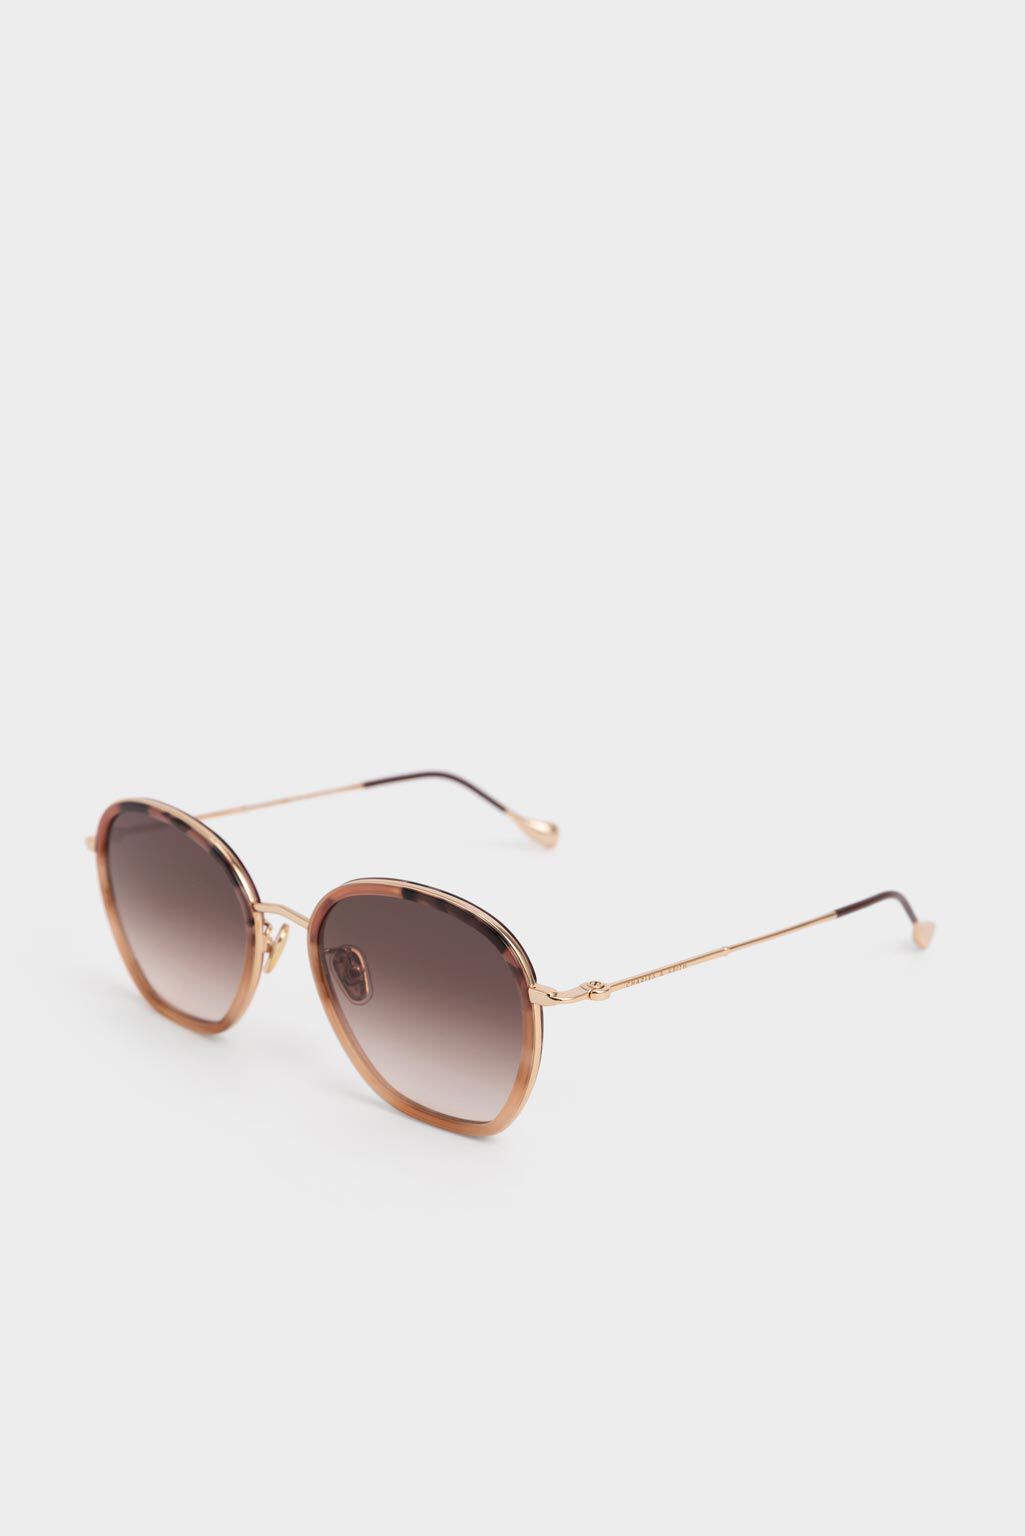 LU - Sunglasses KEITH Wire-Frame CHARLES Acetate Pink & Recycled